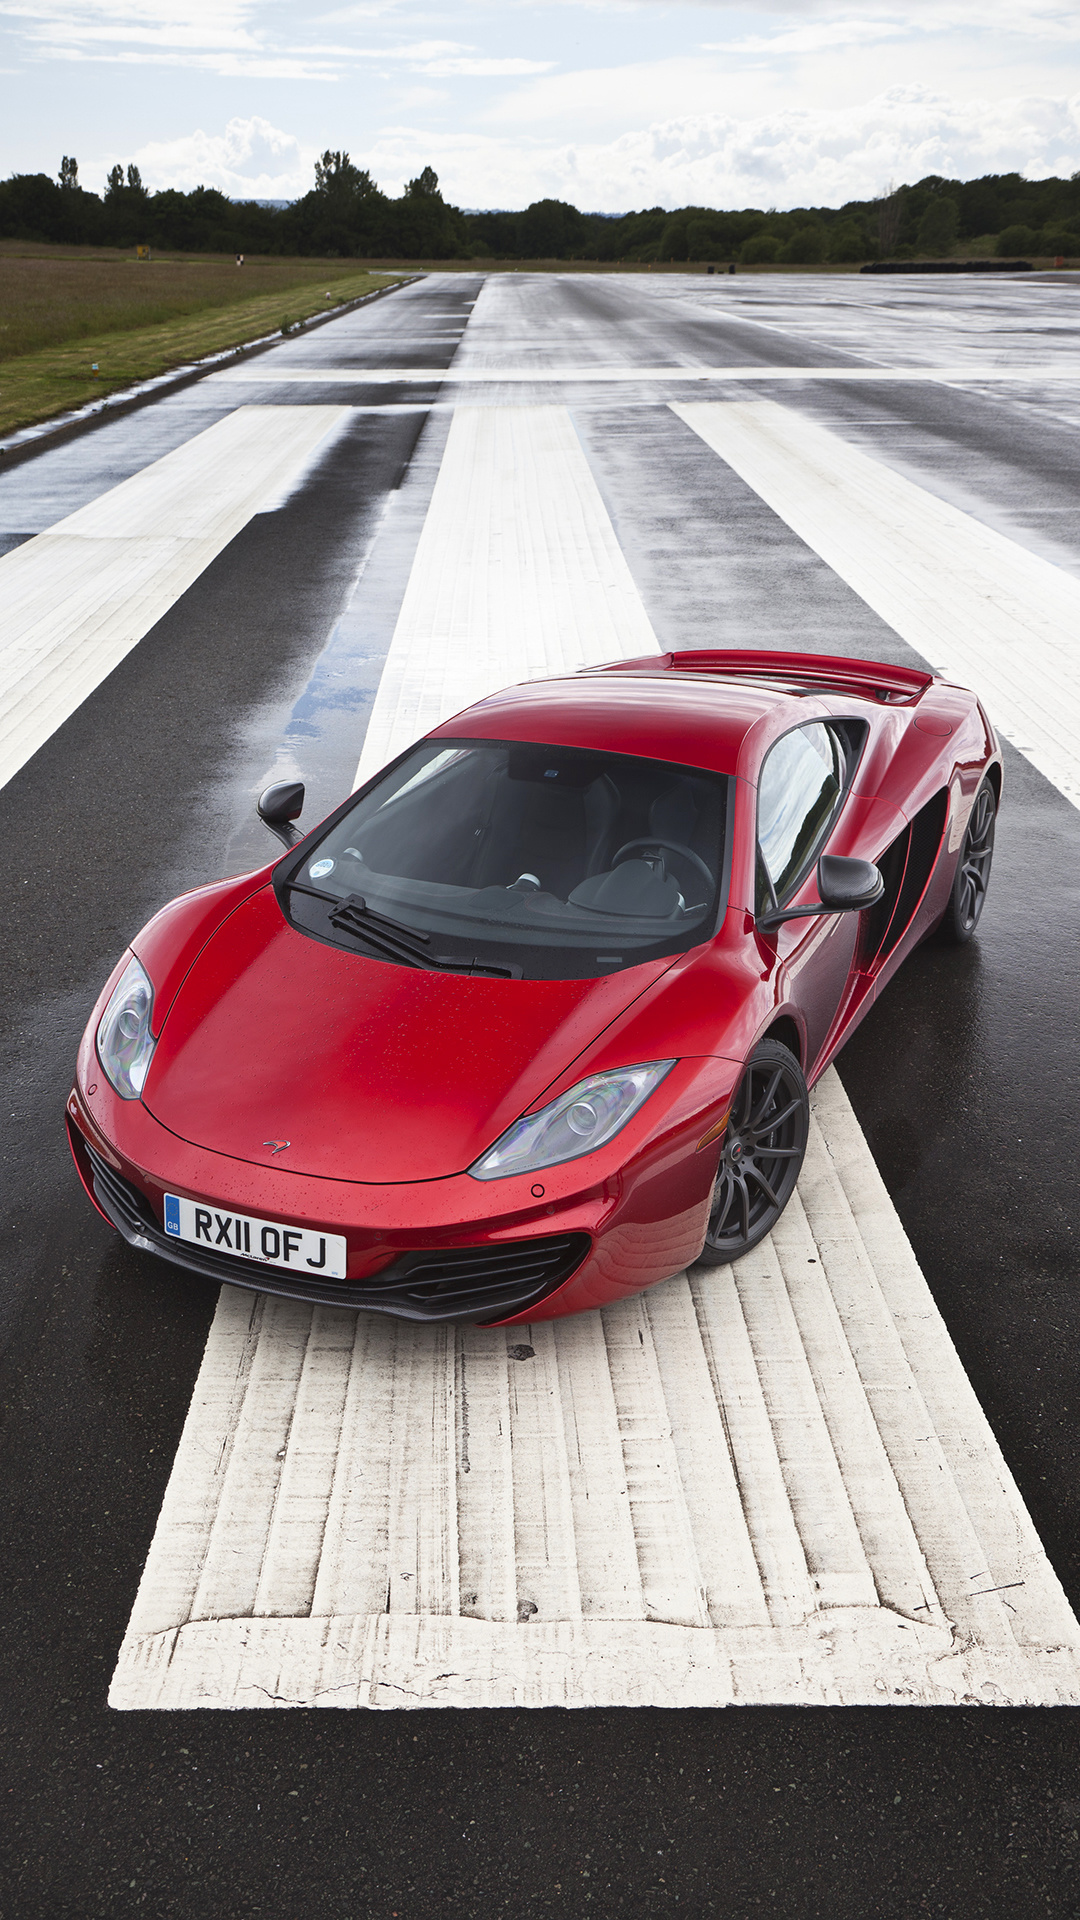 McLaren 12C, Red car, HTC One wallpaper, High-definition image, 1080x1920 Full HD Phone